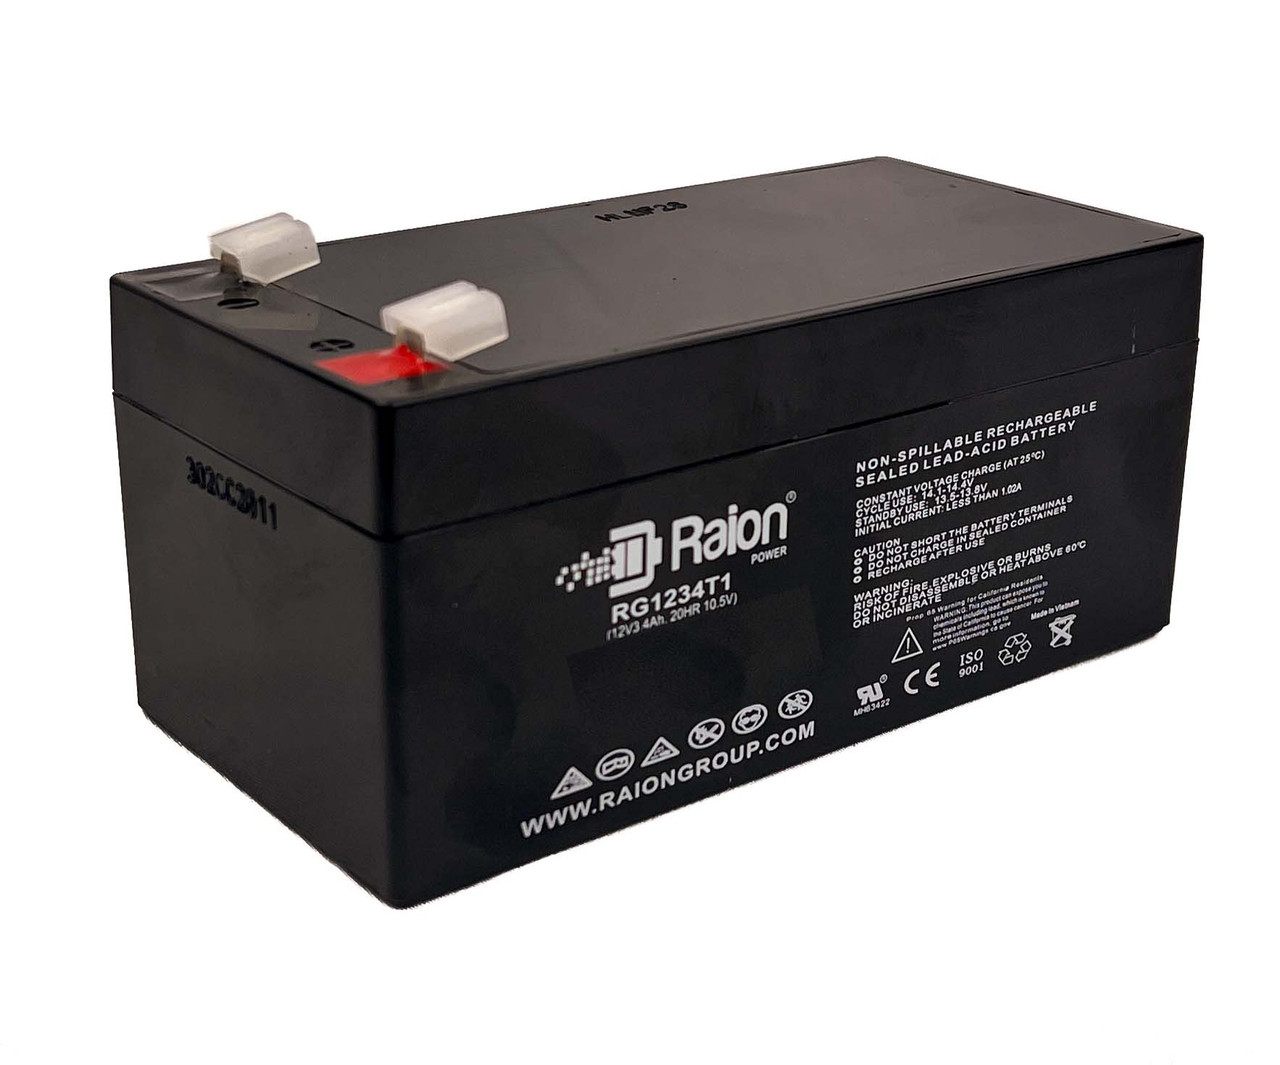 Raion Power 12V 3.4Ah Non-Spillable Replacement Battery for Sigmas SP12-3.5HR